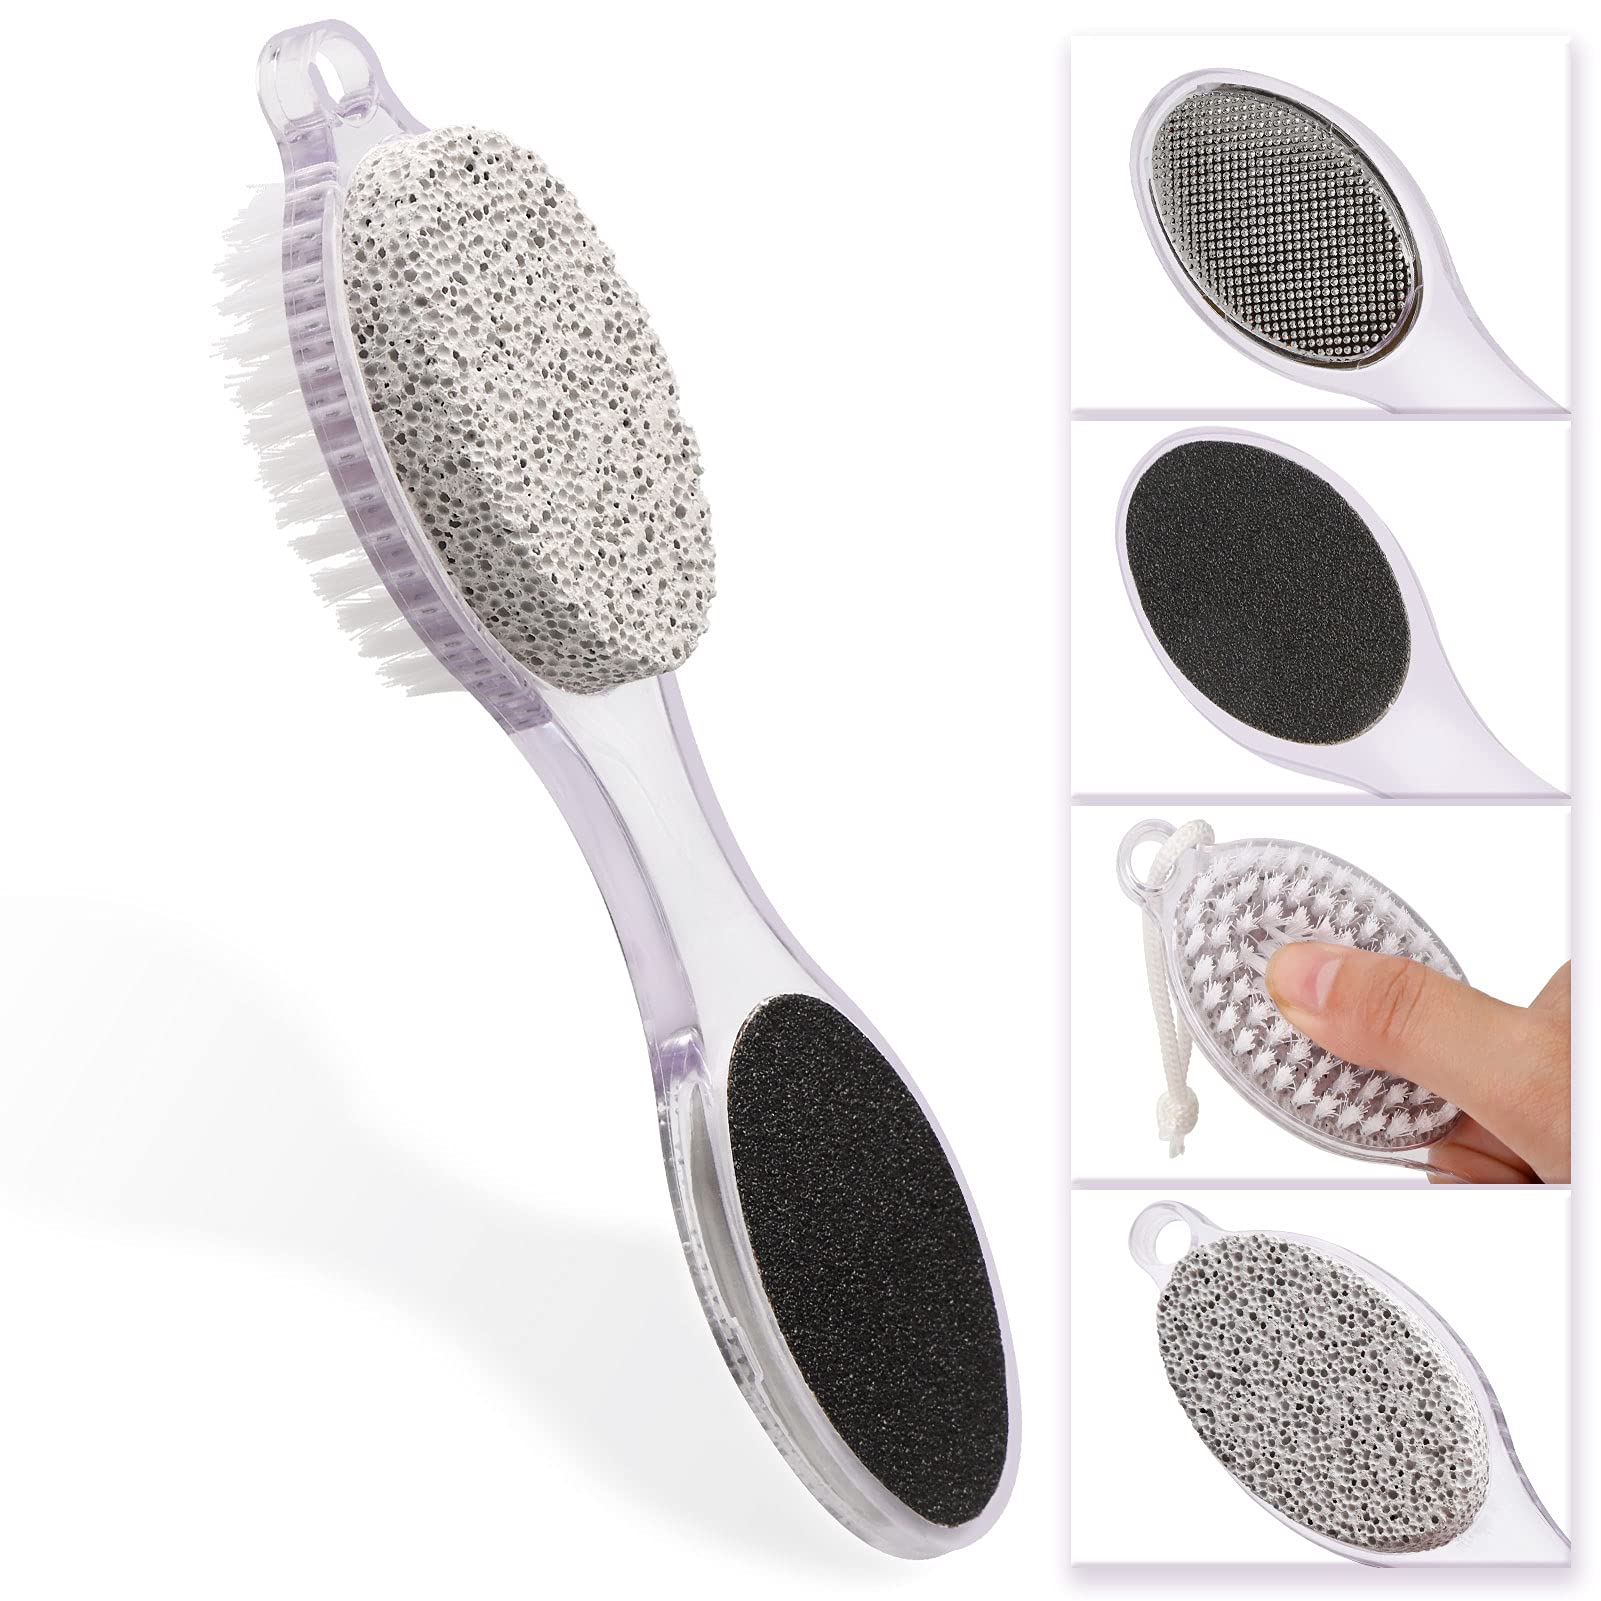 Foot Files for Hard Skin - 4 in 1 Foot File with Pumice Stone, Sandpaper File, Stainless Steel Fine File and Foot Scrubber to Remove Dead Skin Easily - Perfect Metal File for Household Foot Care